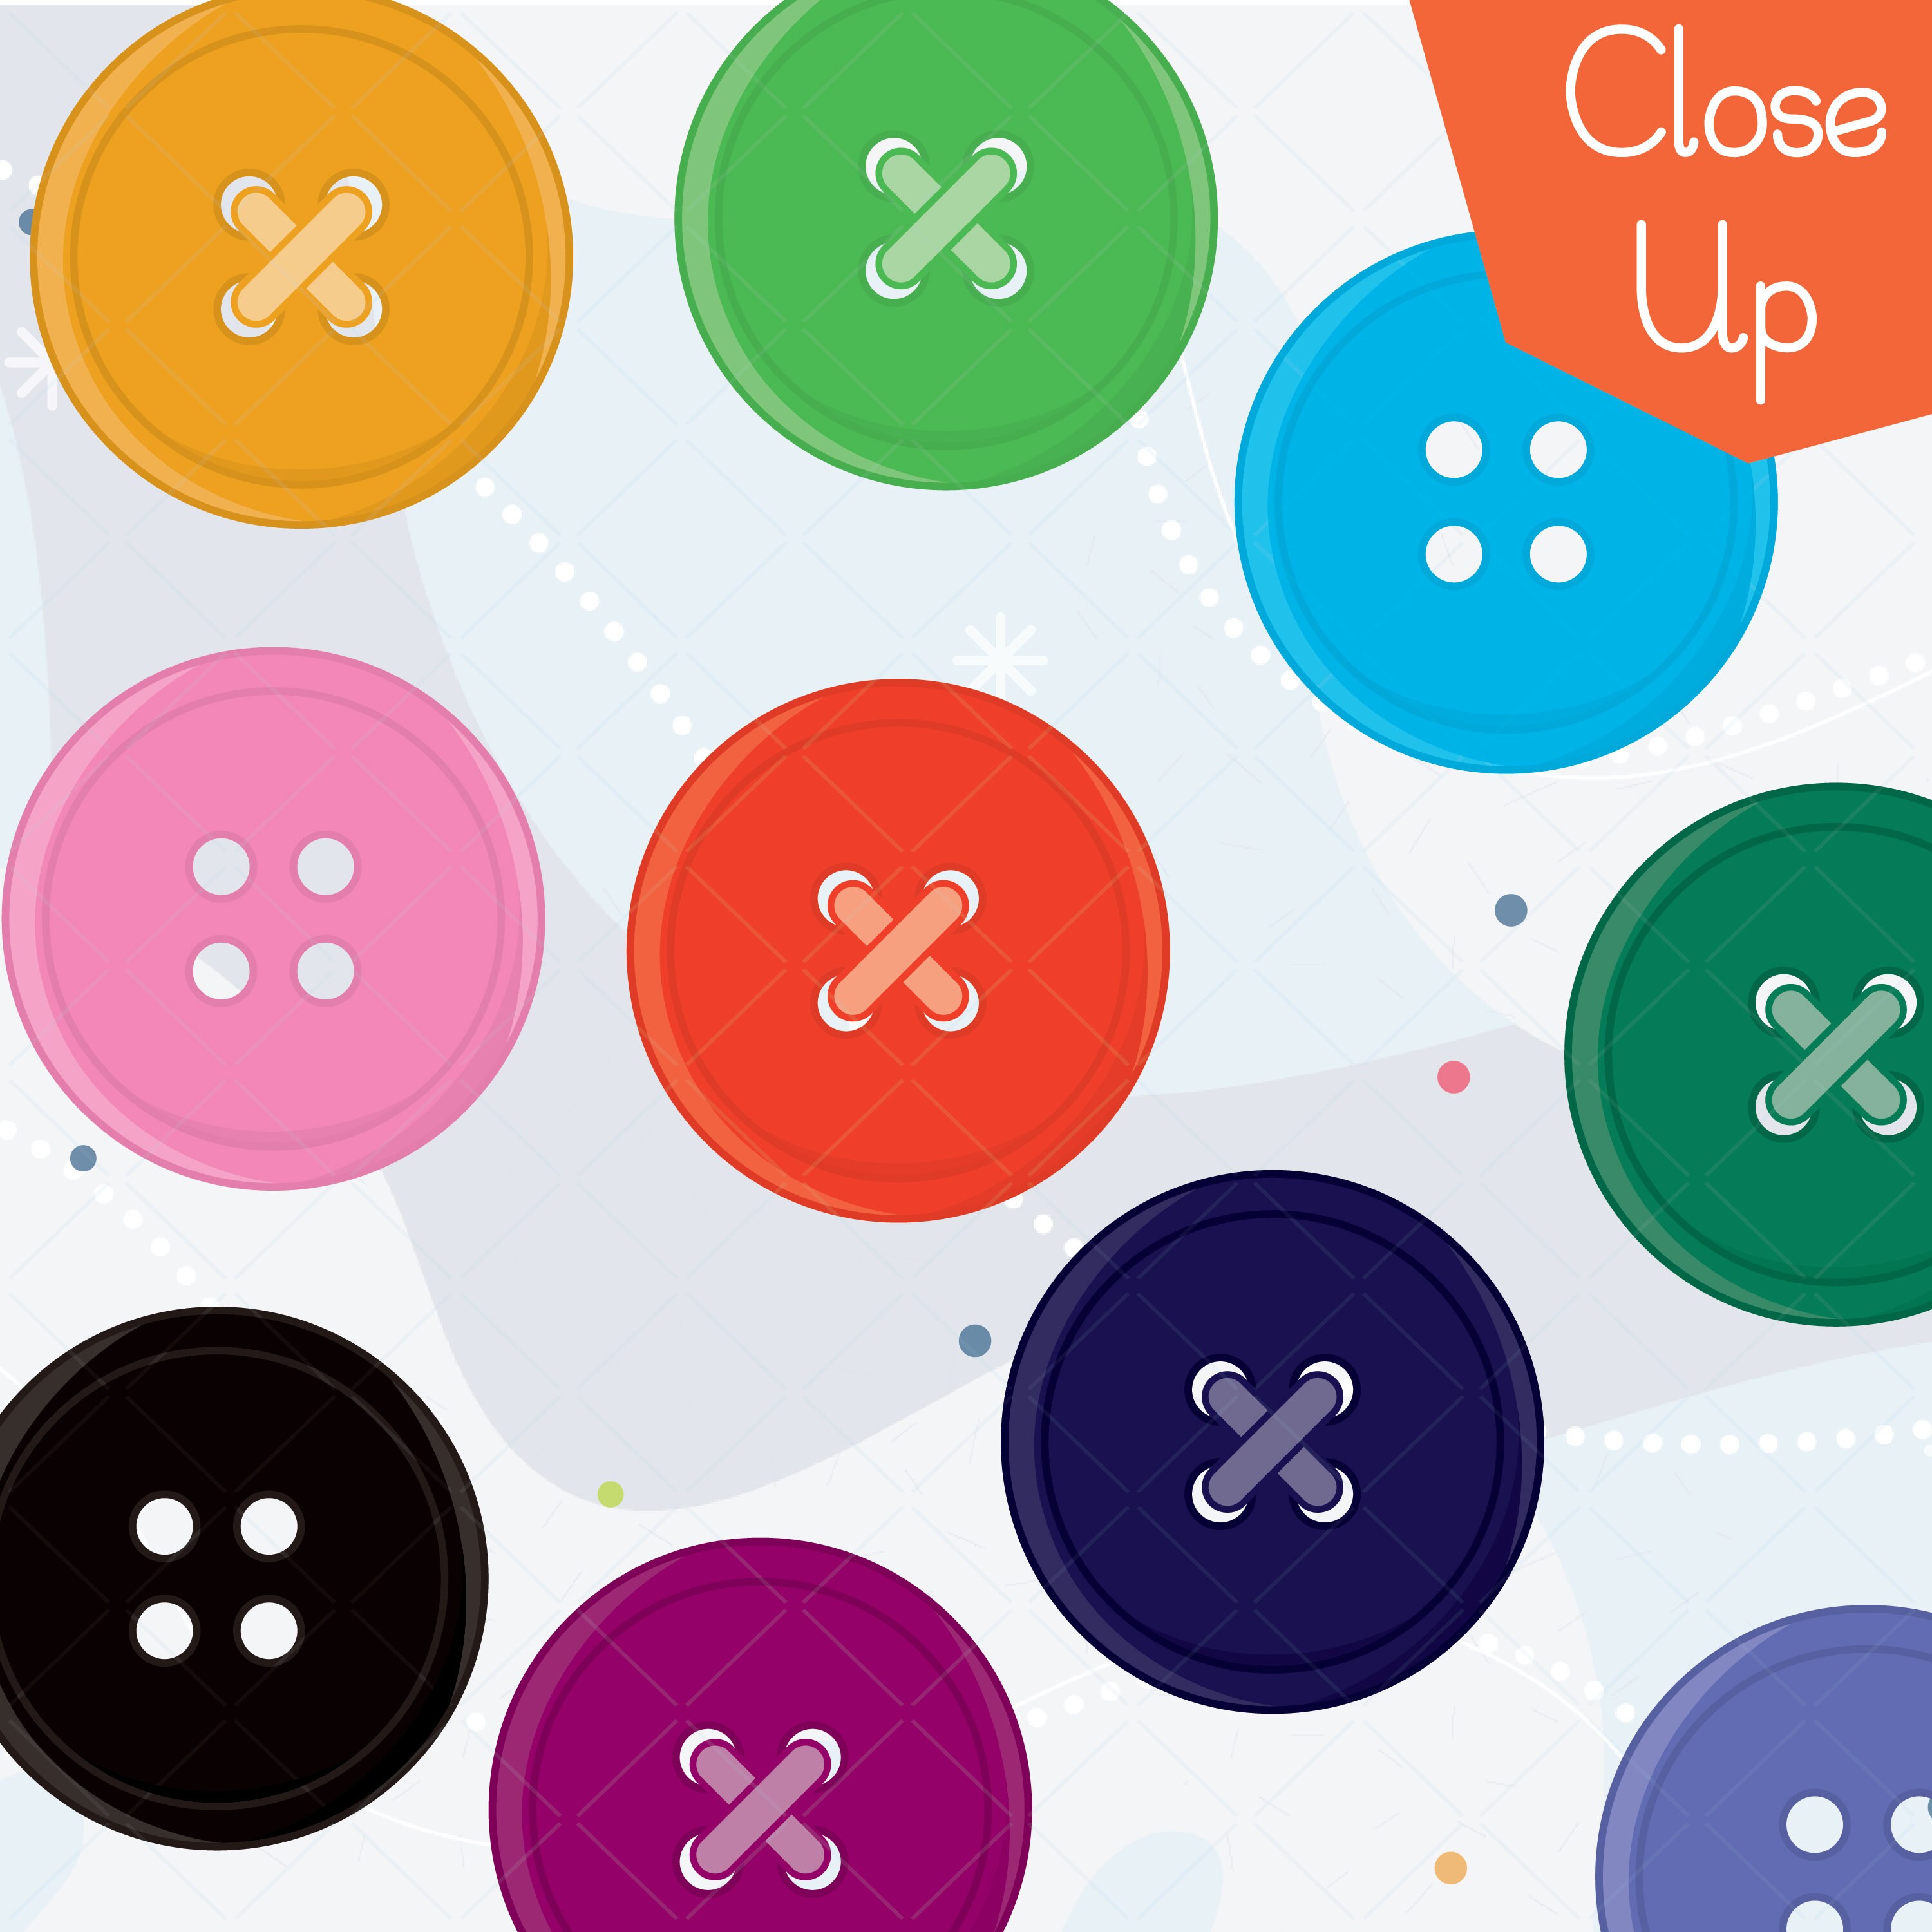 Colorful Buttons stock vector. Illustration of button - 5222716